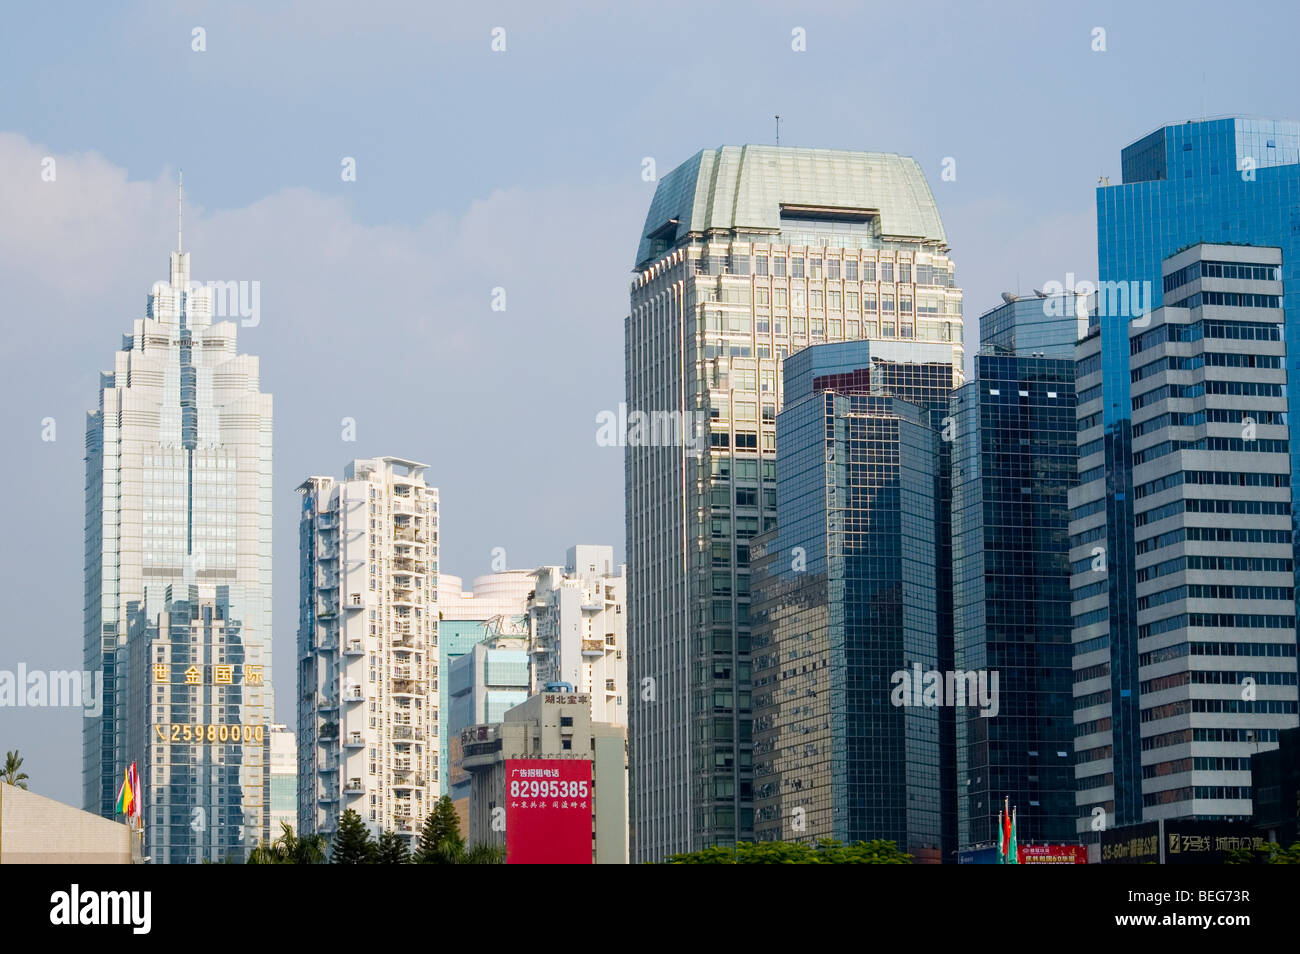 Shenzhen cityscape, modern business city in China. Luohu district, city center with skyscrapers, office buildings. Stock Photo